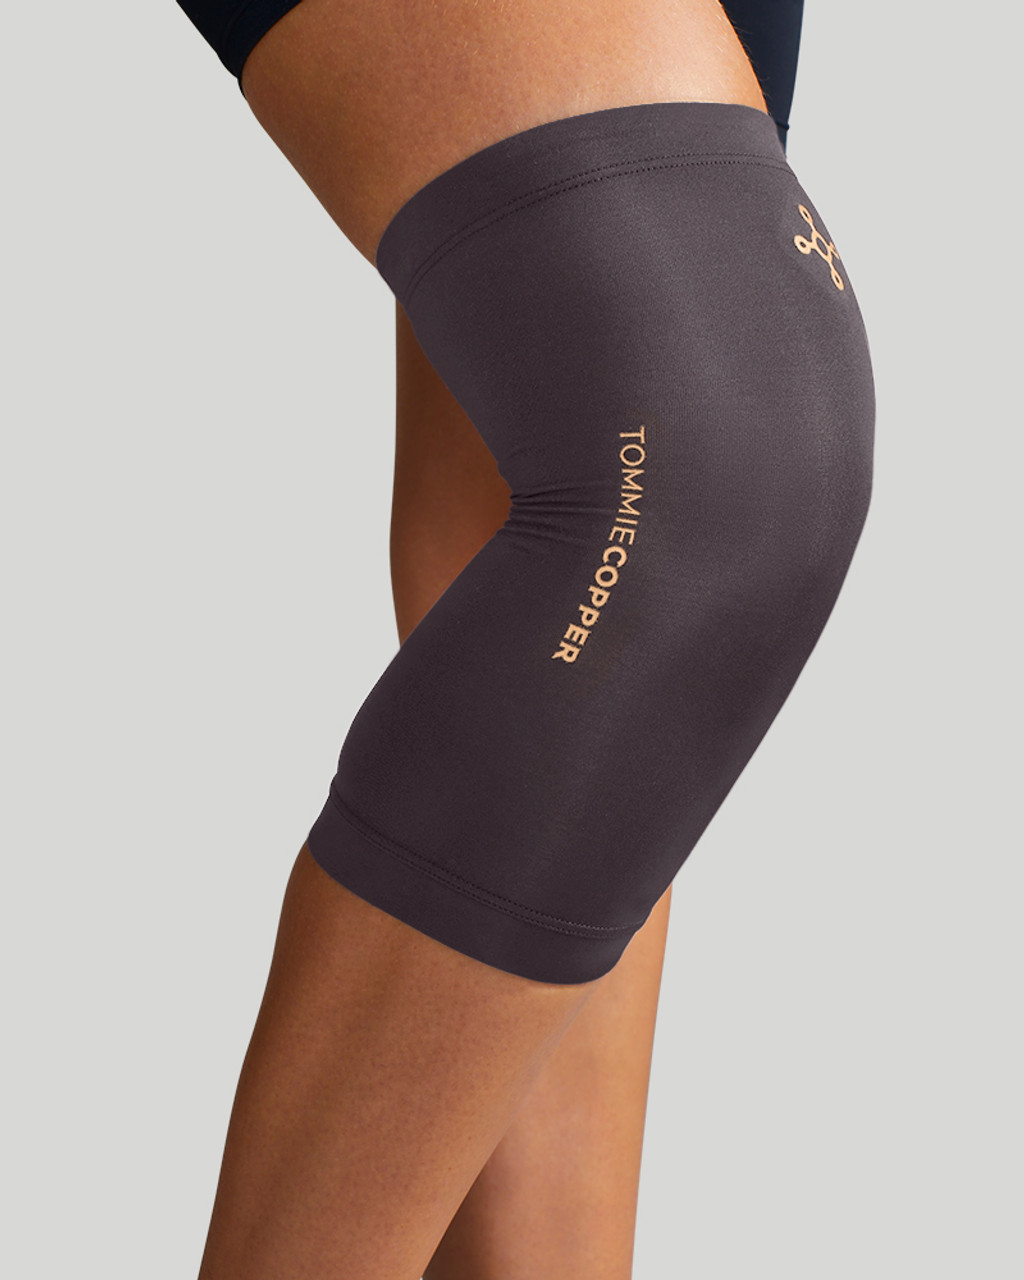 Tommie Copper Pro-Grade Compression Knee Sleeve, Unisex, Men & Women,  Adjustable Ultimate Support Sleeve, Integrated Straps for Knee Stability &  Muscle Support - Black, Small : Health & Household 